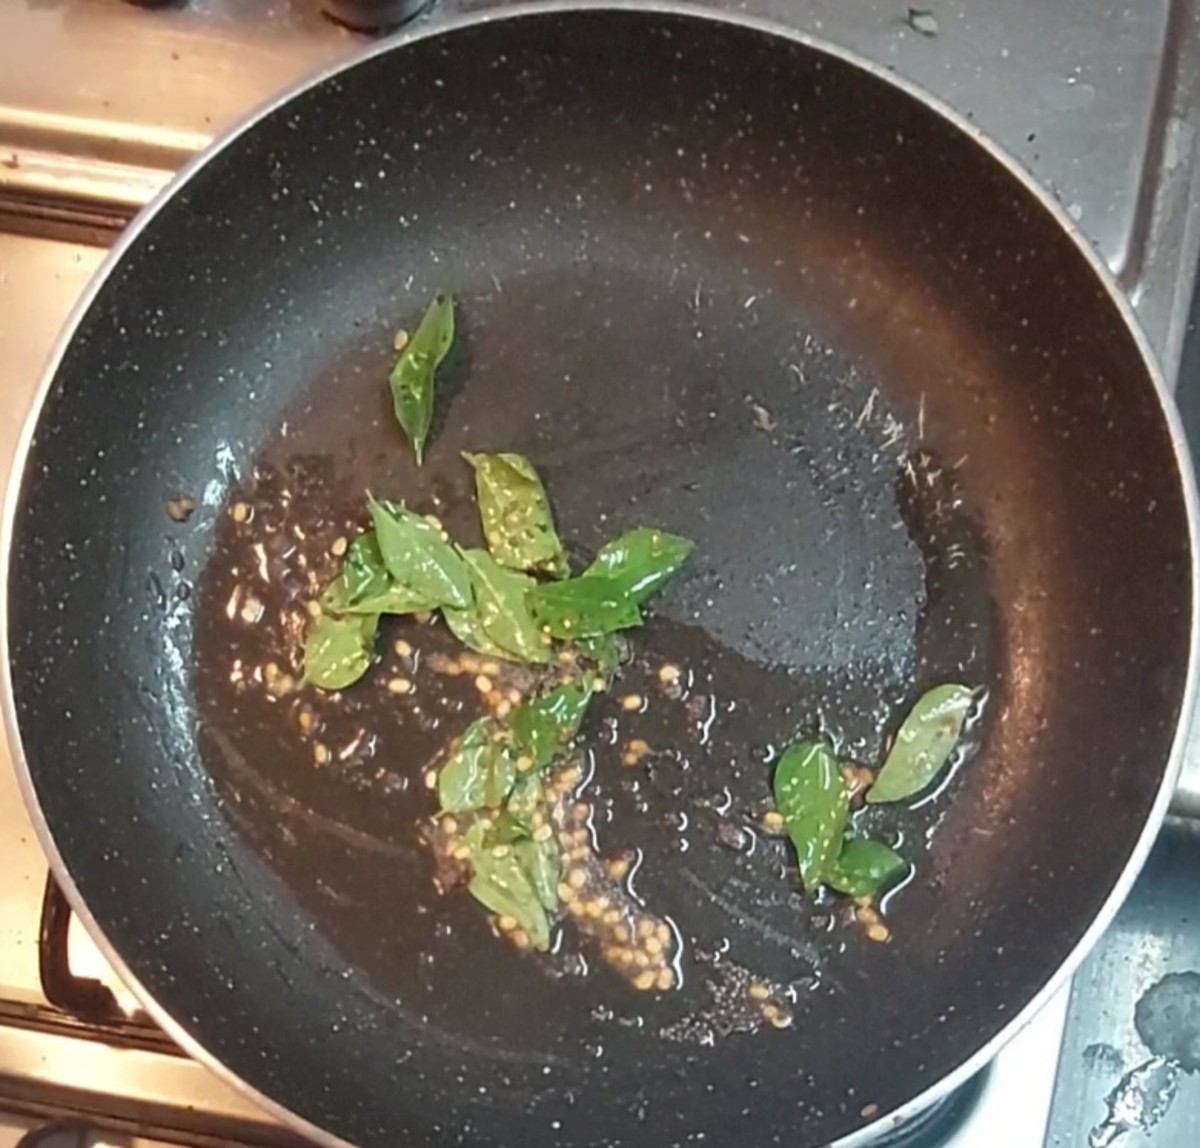 In a frying pan, heat 1 teaspoon oil and splutter 1/2 teaspoon mustard seeds. Add 1/2 tespoon urad dal and saute. Add a sprig of curry leaves and 1/4 teaspoon hing. Mix and switch off the flame.